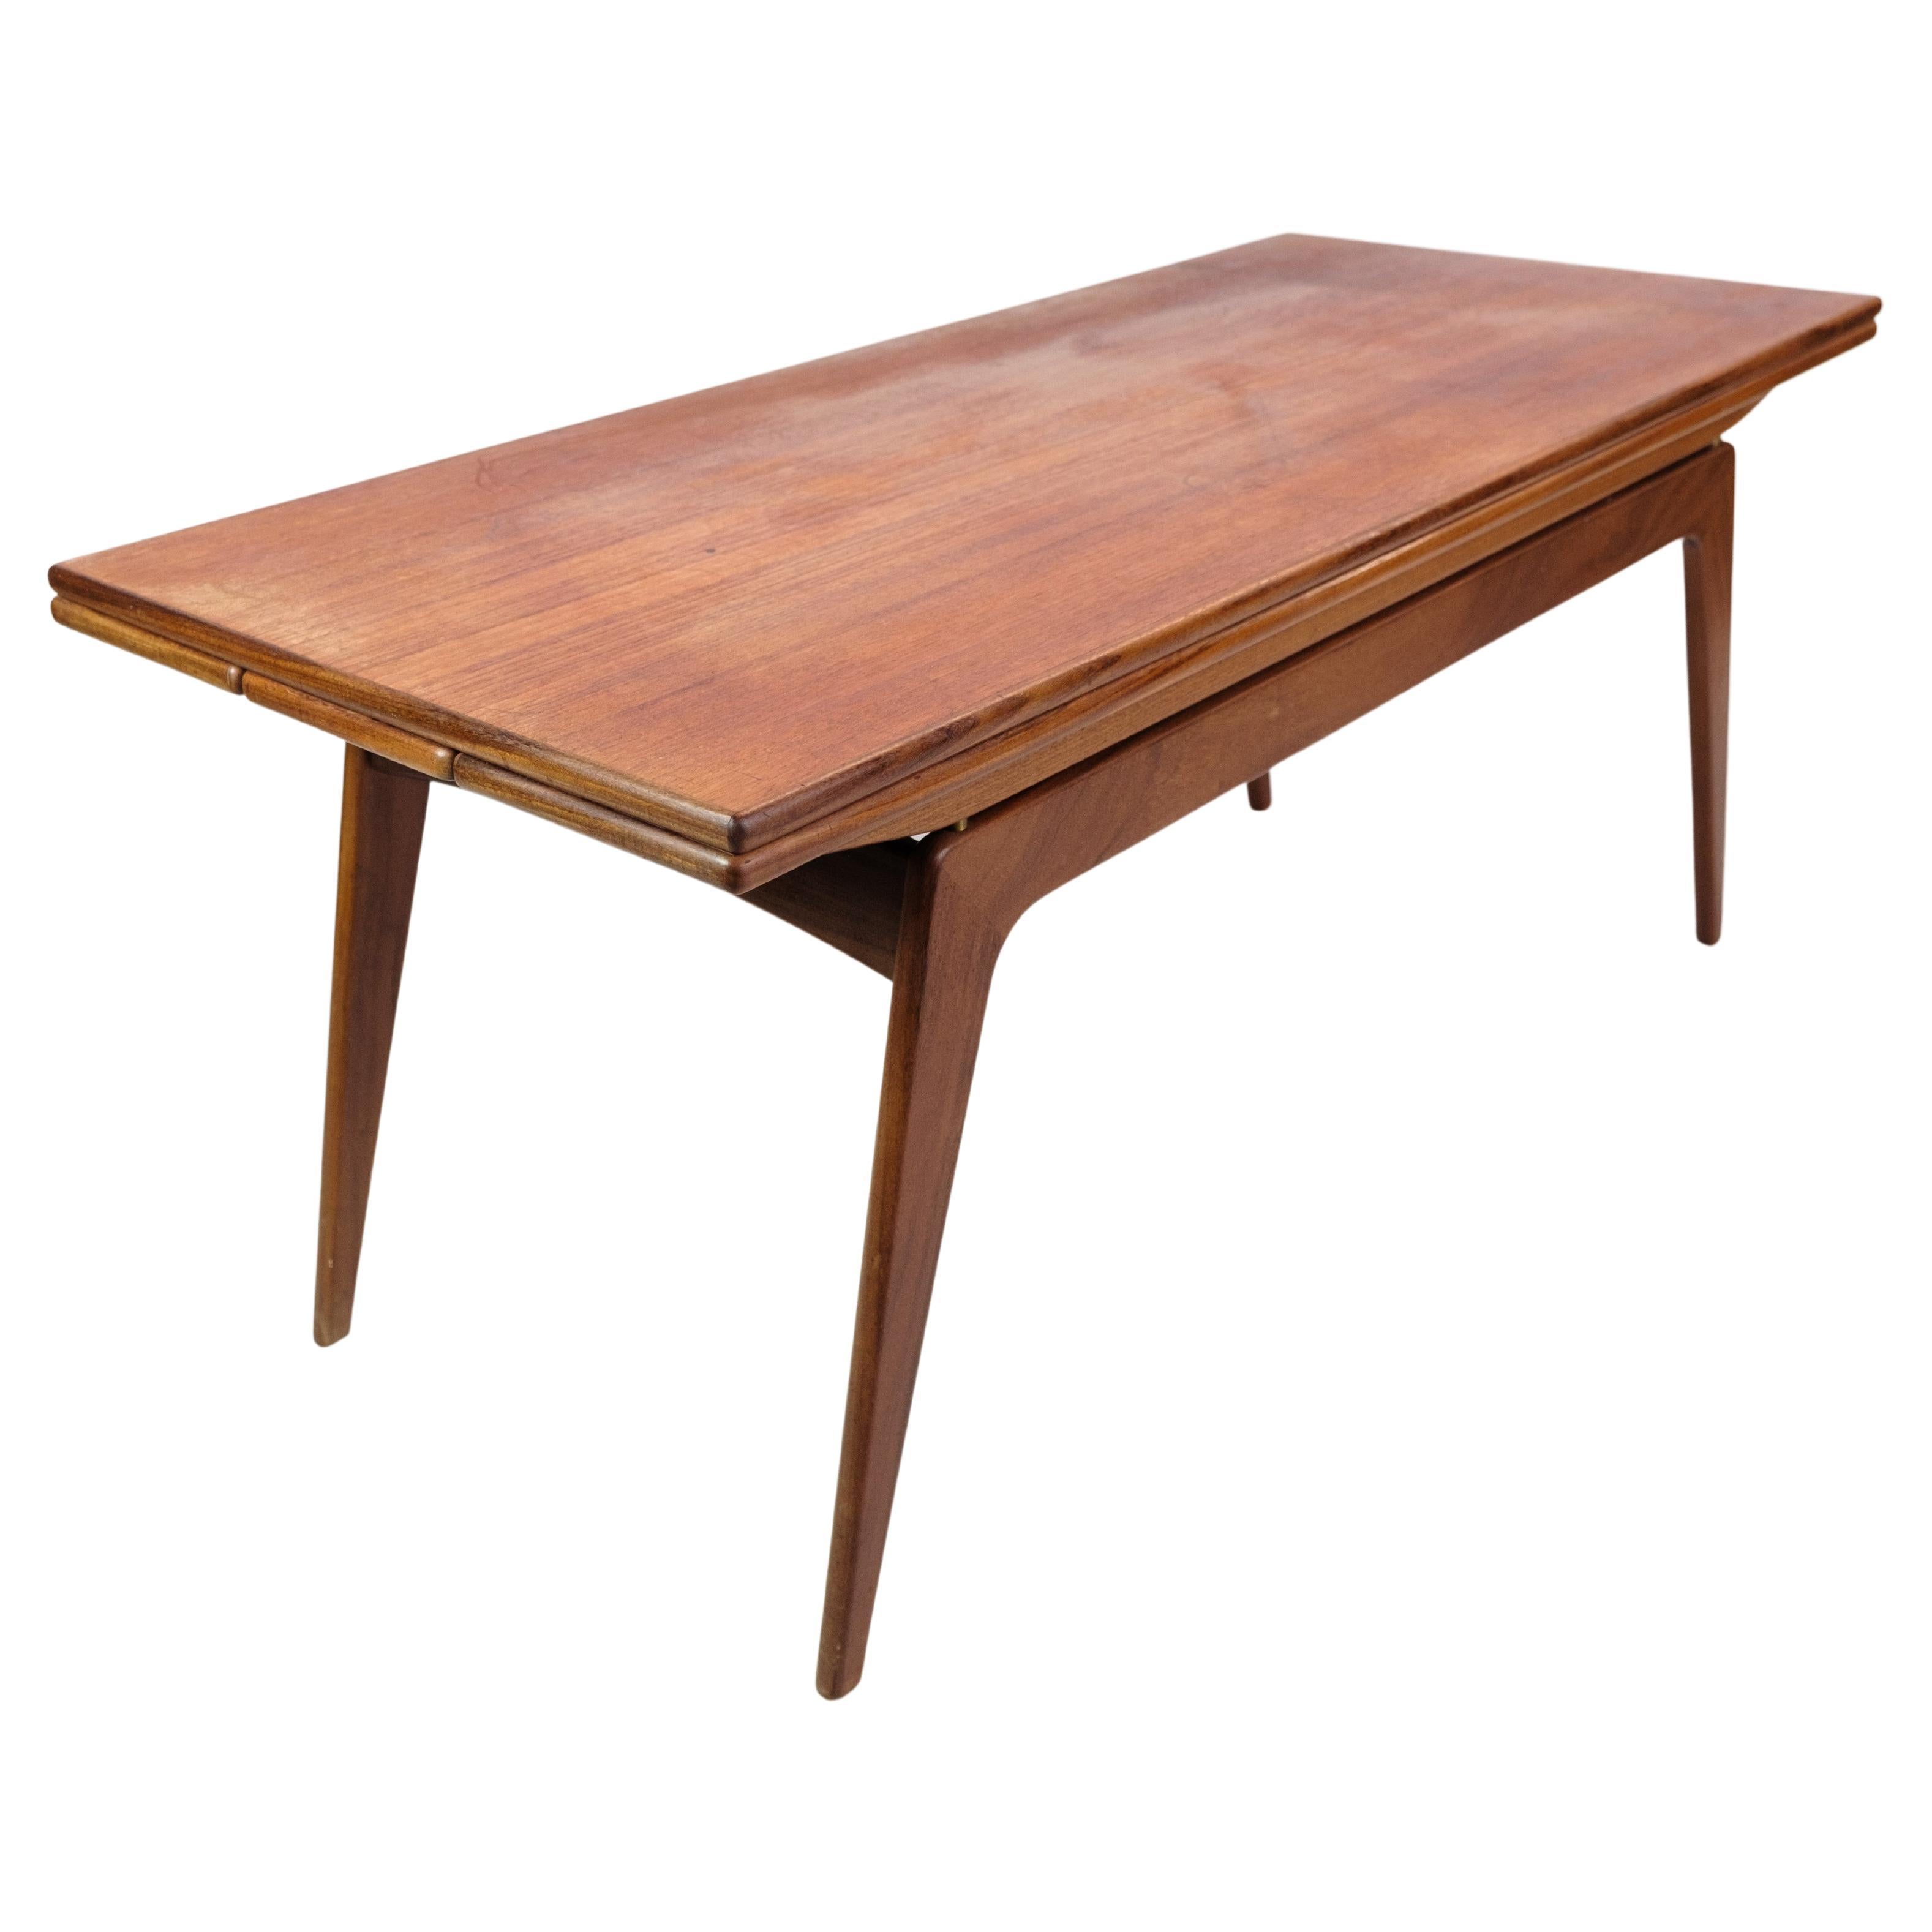 Coffee Table / Dining Table Made In Teak, Copenhagen Table From 1960s